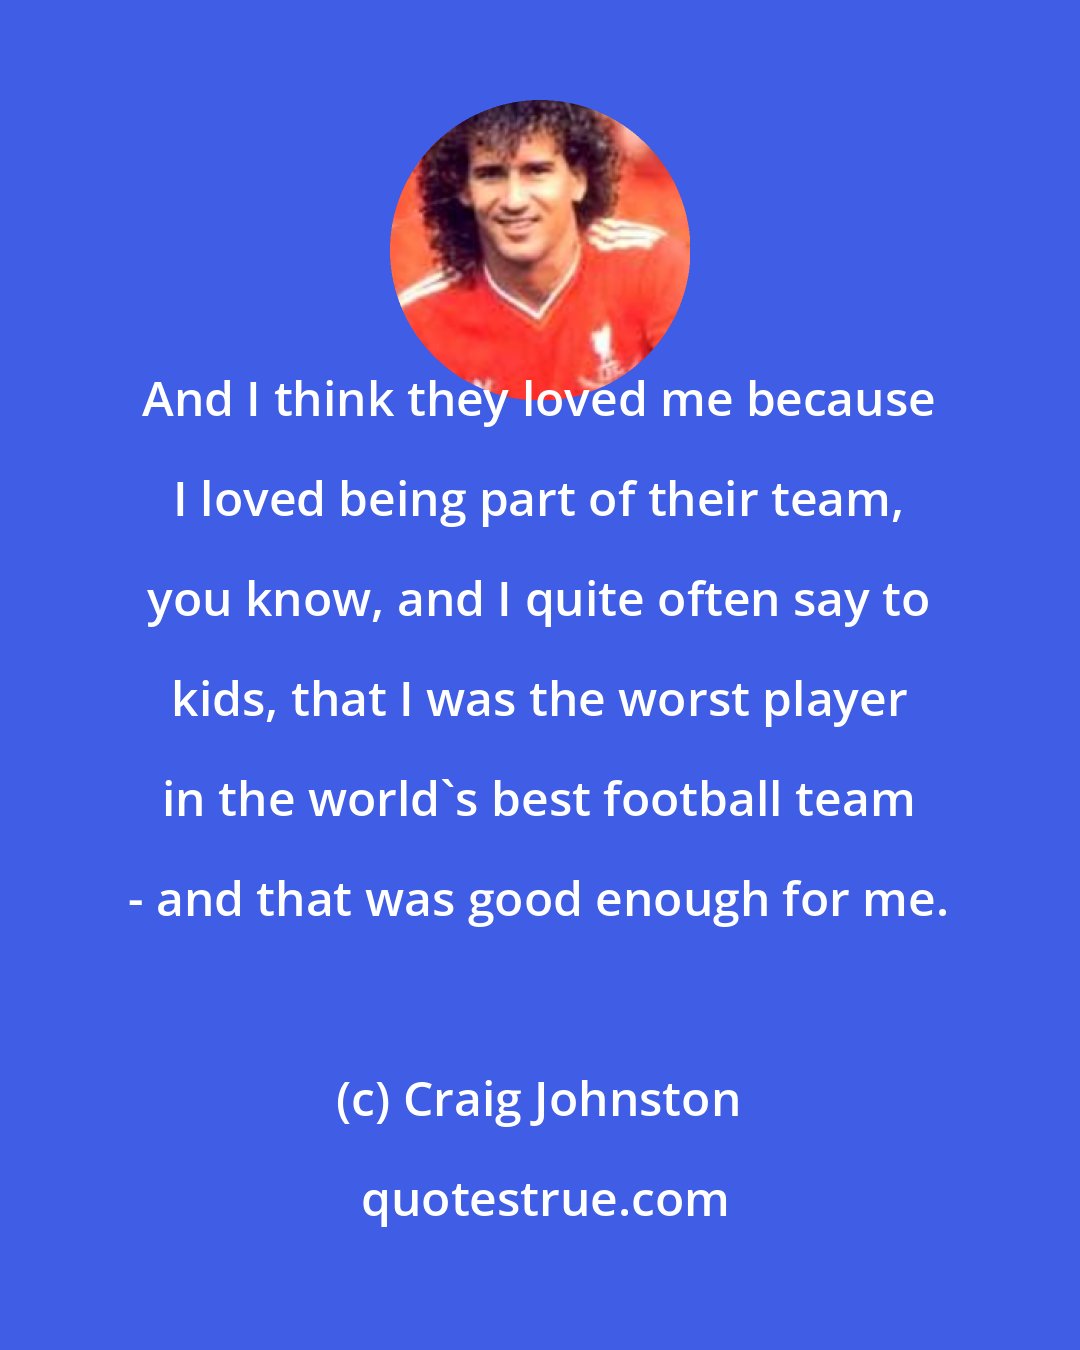 Craig Johnston: And I think they loved me because I loved being part of their team, you know, and I quite often say to kids, that I was the worst player in the world's best football team - and that was good enough for me.